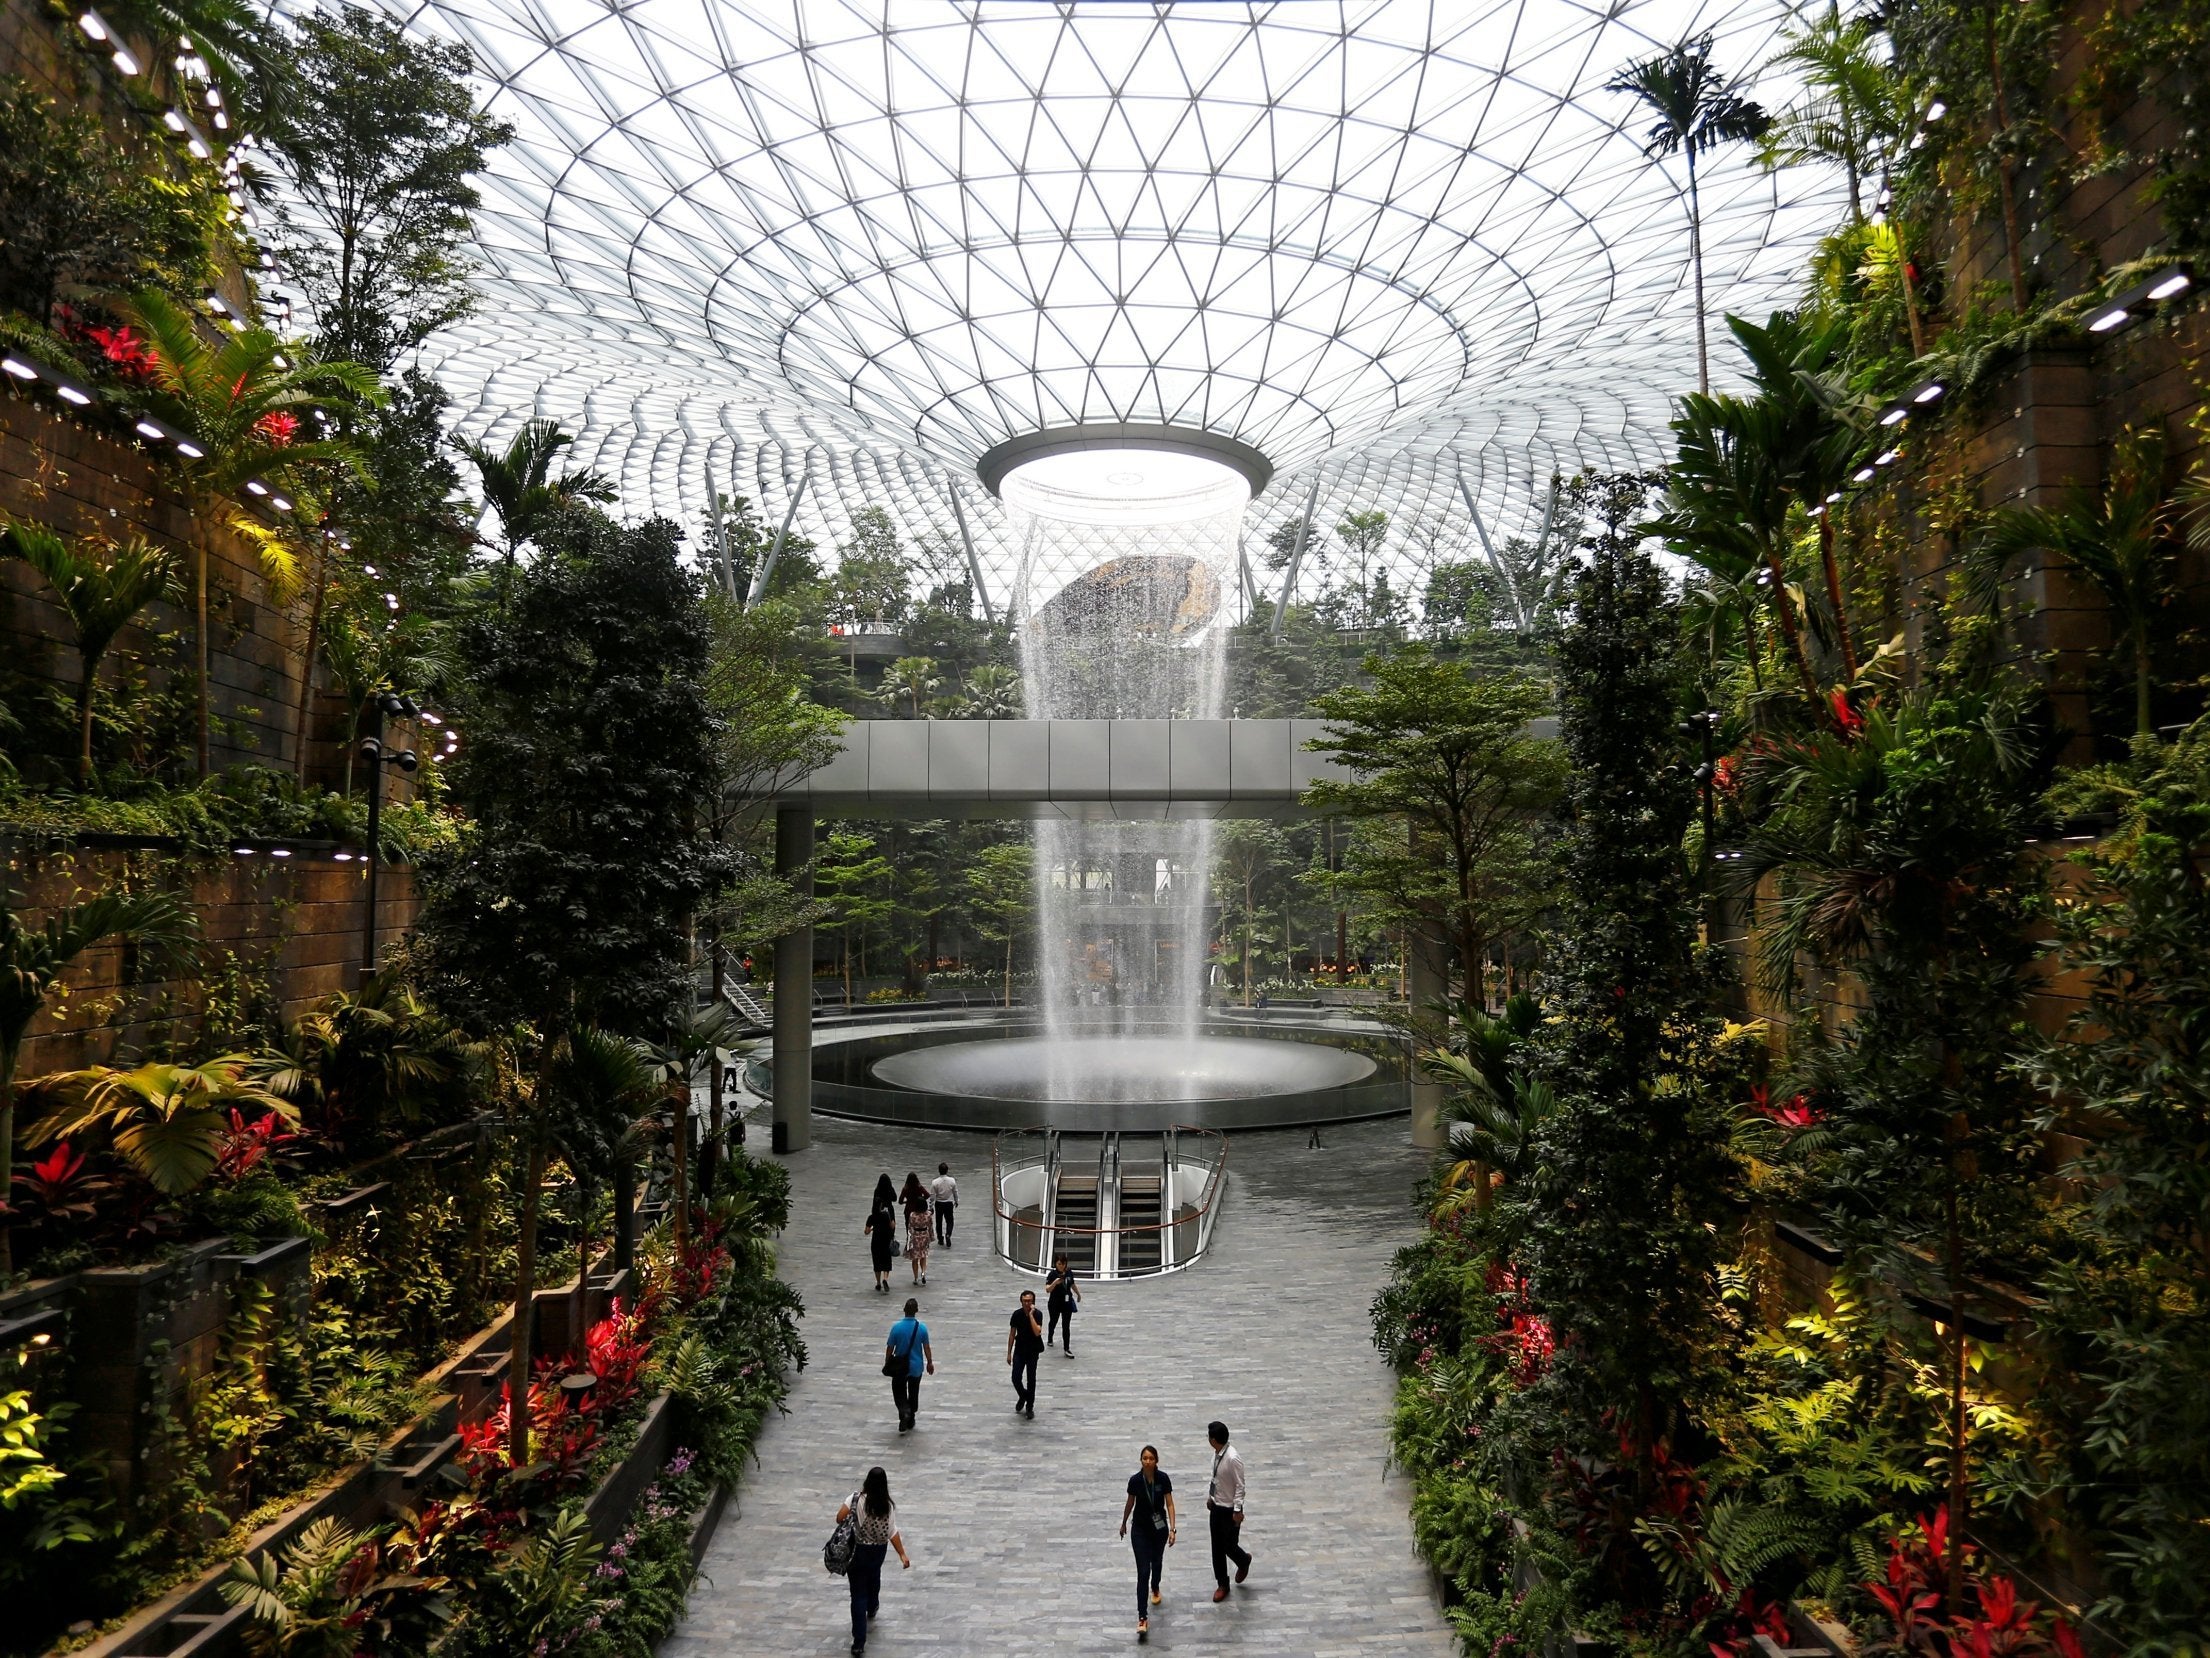 The world’s tallest indoor waterfall is just one attraction at Changi airport